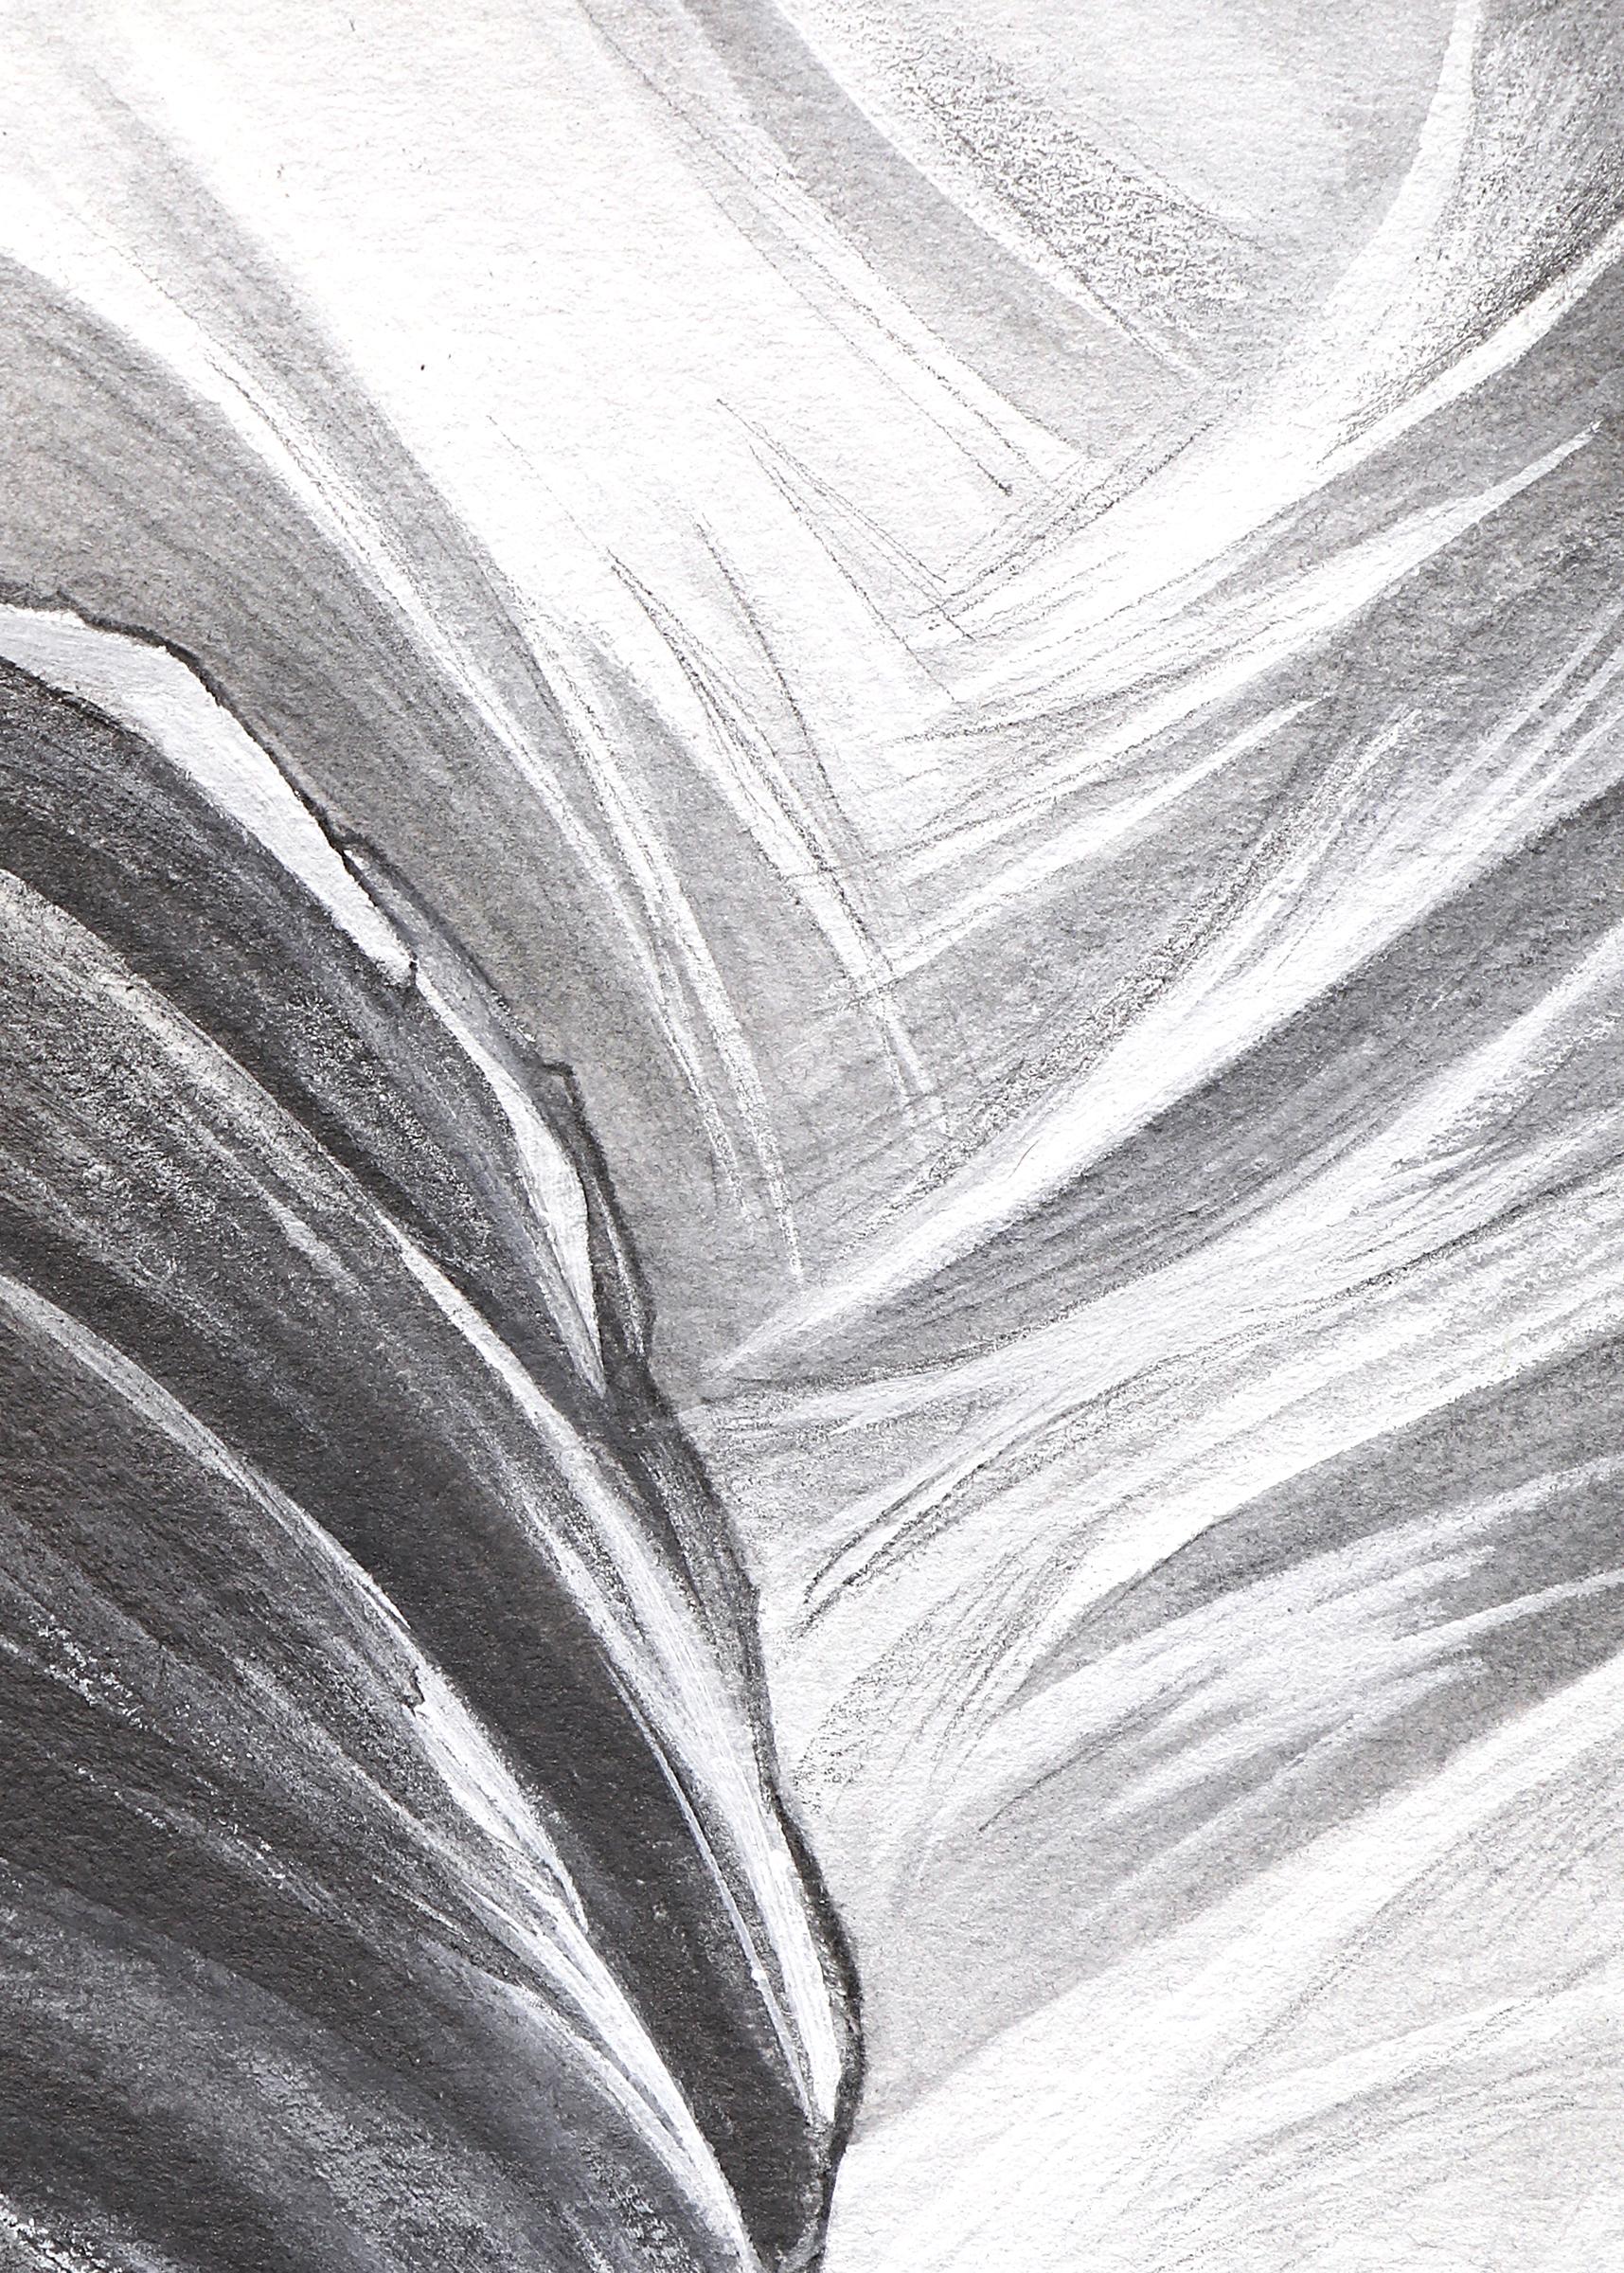 Pair of Abstract Graphite Casein Southwestern Landscape Drawings, Black White 9